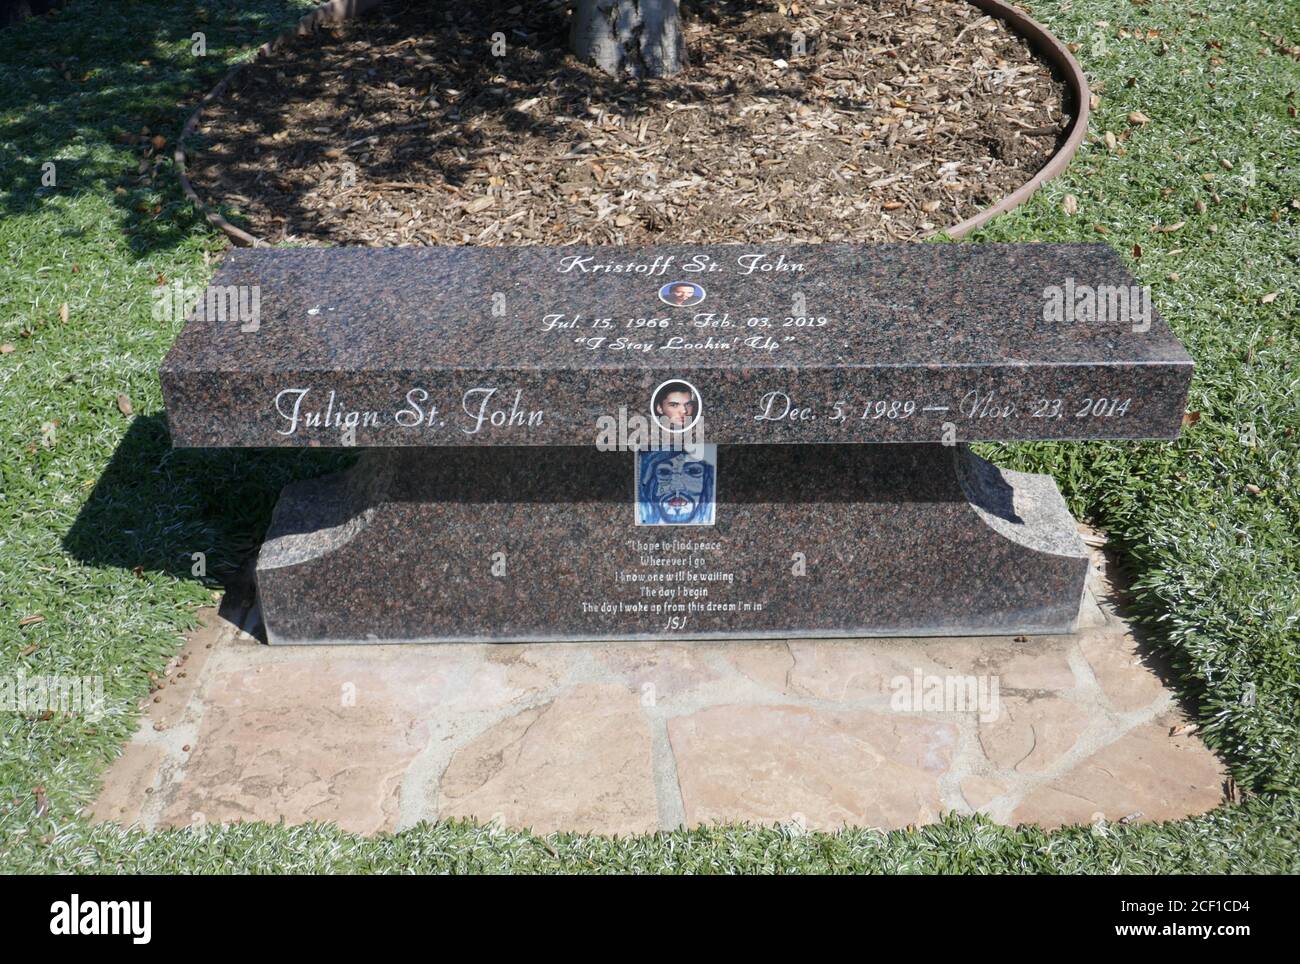 Westlake Village, California, USA 2nd September 2020 A general view of atmosphere of actor Kristoff St. John and his son Julian St. John's Graves in Garden of Reflections at Pierce Brothers Valley Oaks Memorial Park on September 2, 2020 in Westlake Village, California, USA. Photo by Barry King/Alamy Stock Photo Stock Photo